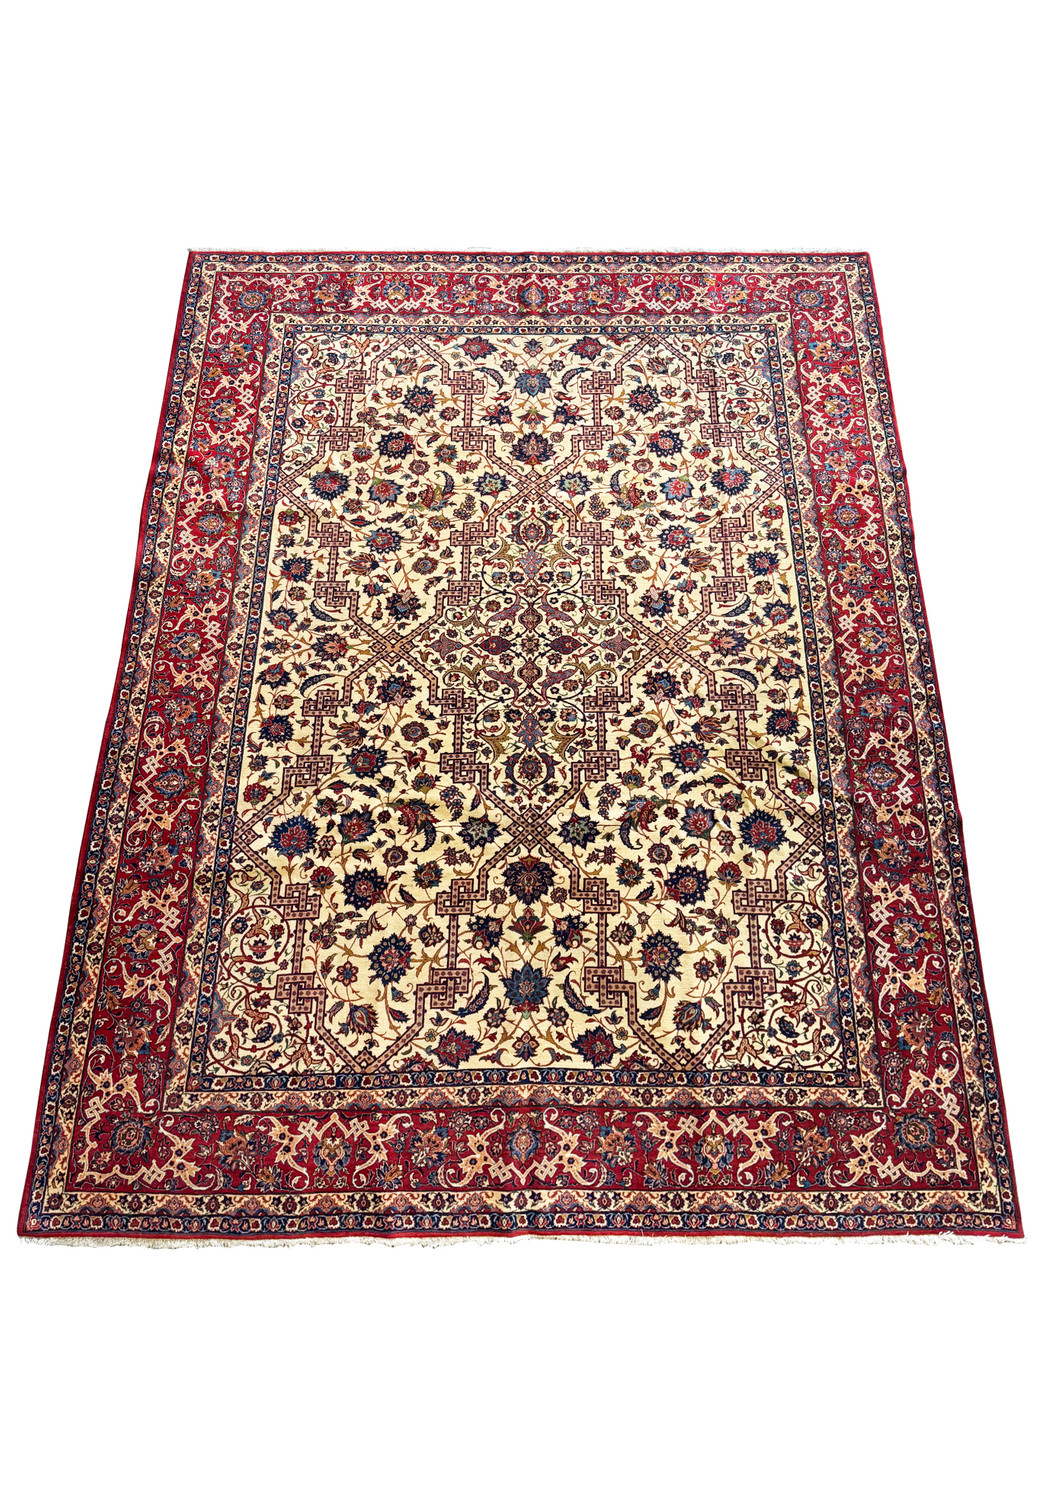 Complete rug display on a flat surface, showcasing the detailed floral and geometric designs and rich color scheme.